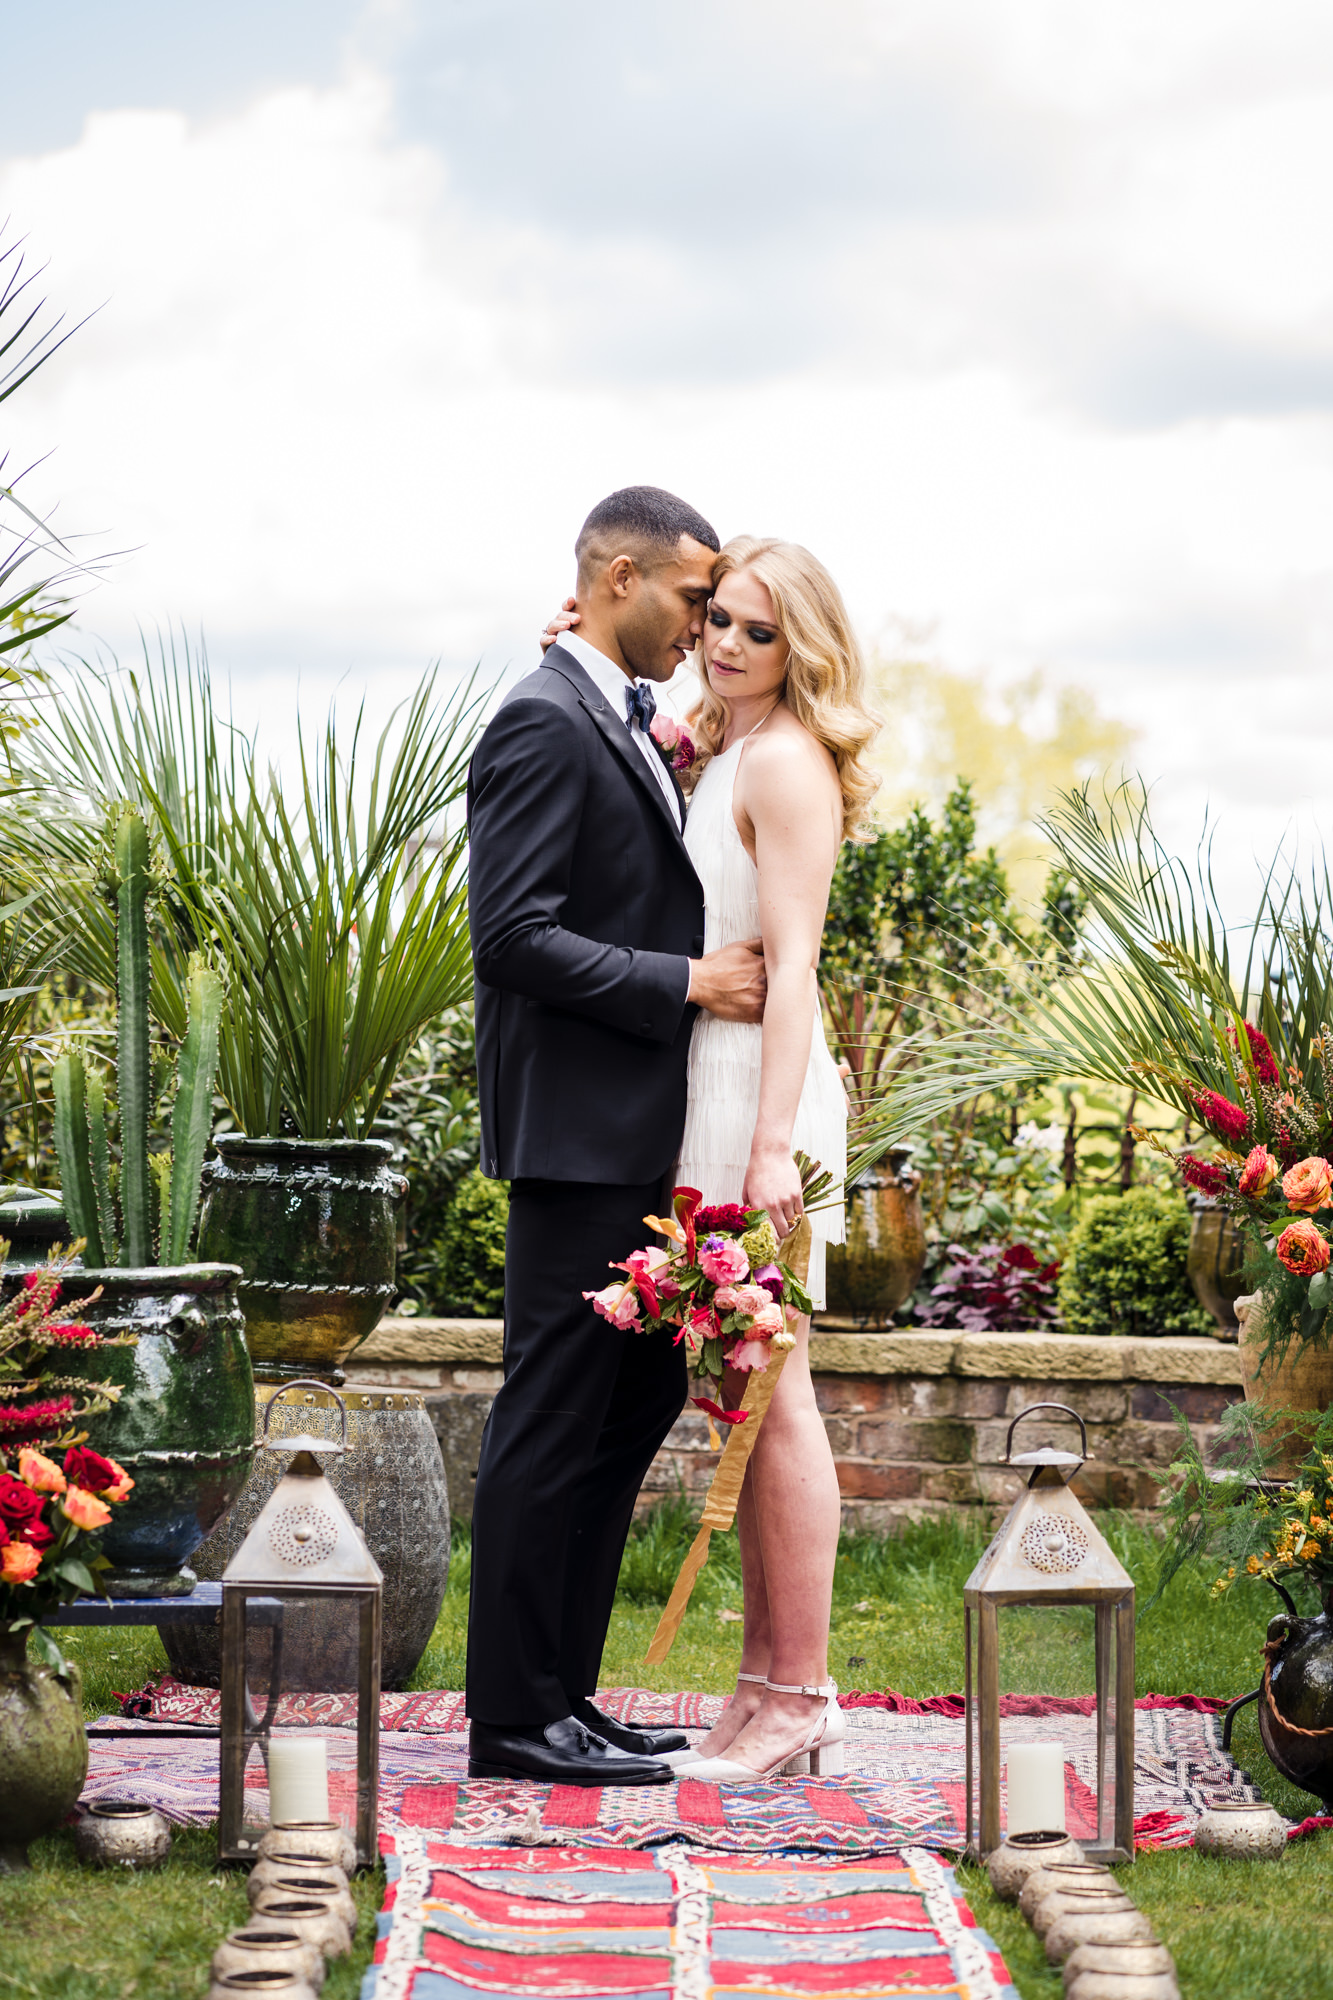 a bride dressed in a short white wedding dress from Charlie Brear hugs a groom wearing a black tie suit and bride holds a colourful bold flower bouquet